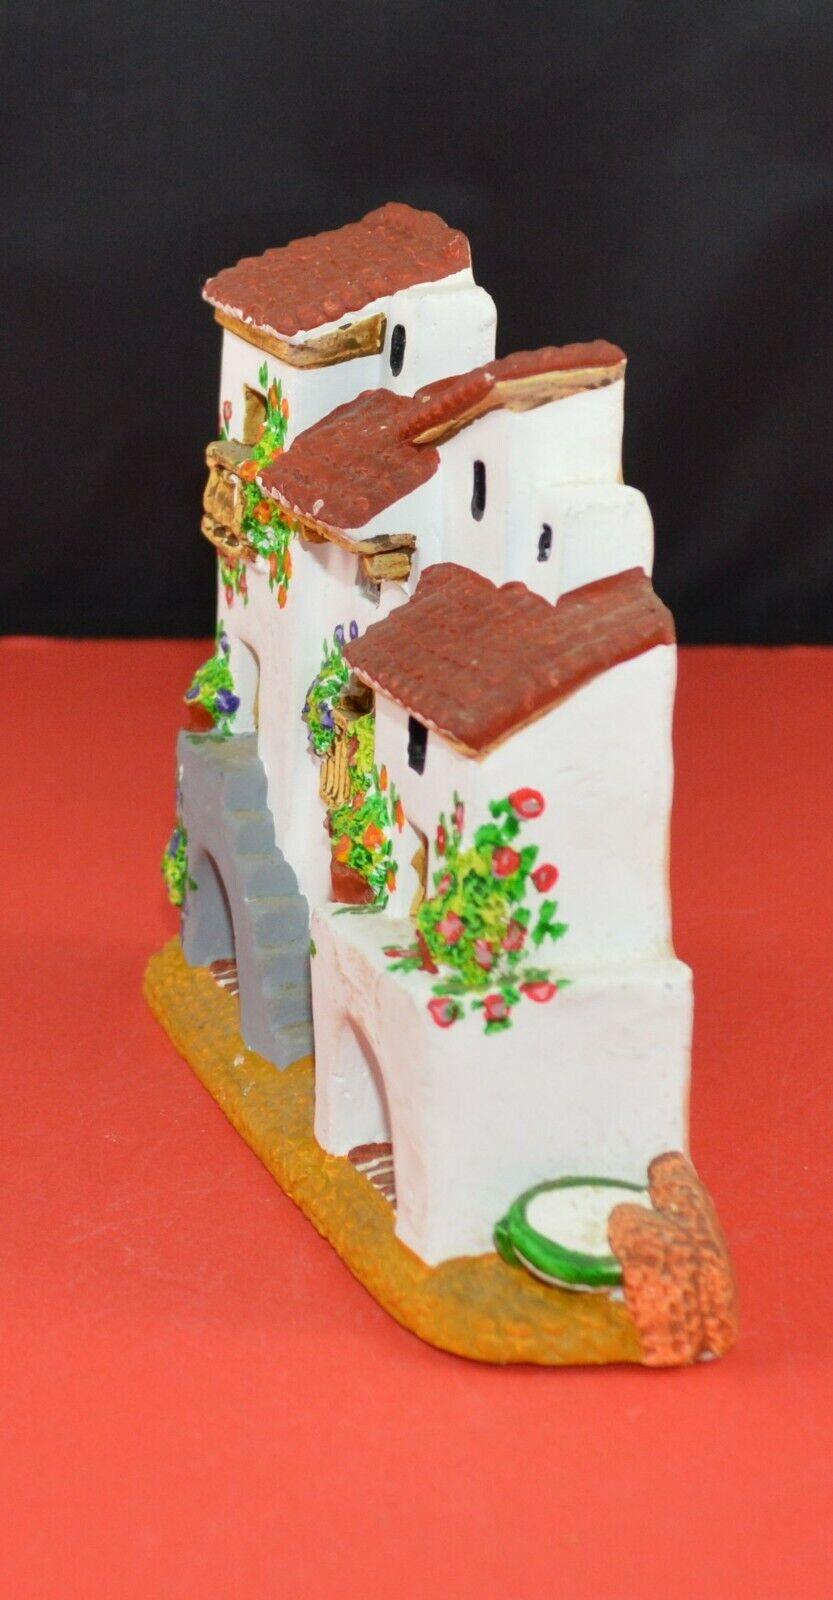 HAND MADE HAND DECORATED HANGING HOUSE DECORATIVE ORNAMENT - TMD167207